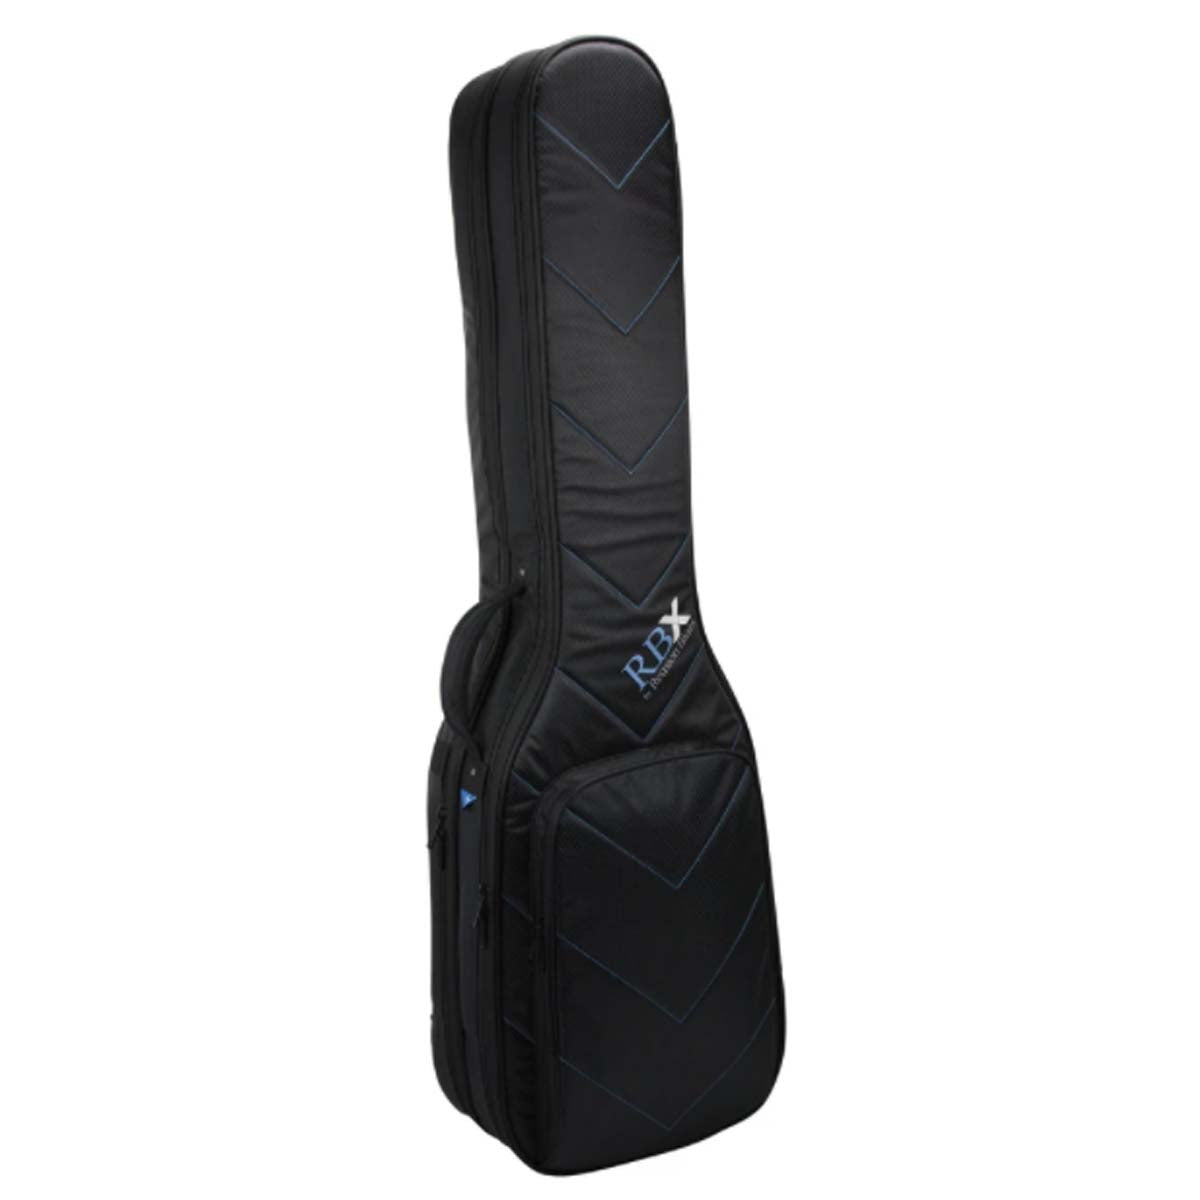 RBX by Reunion Blues Double Electric Bass Guitar Gig Bag - RBX-2B